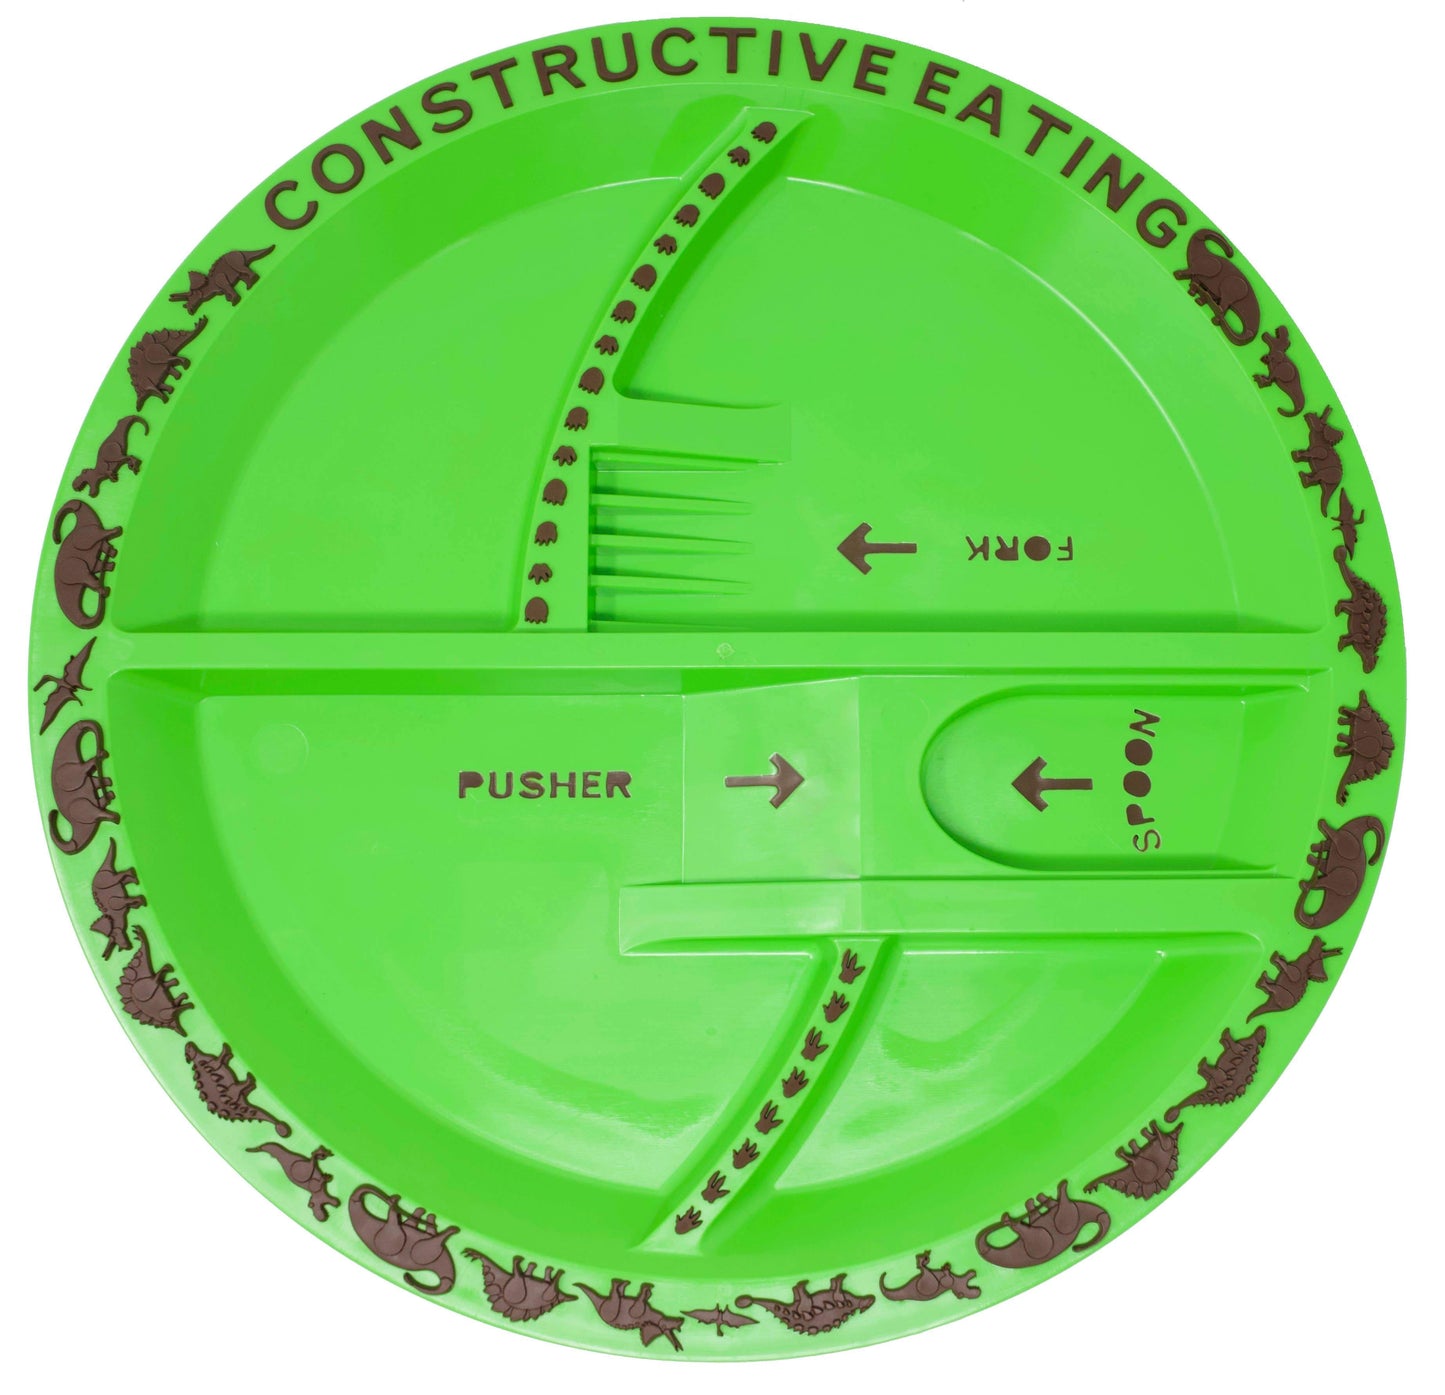 Child Food "Construction" Plate - BPA, Lead and Pvc free (Made in the USA)